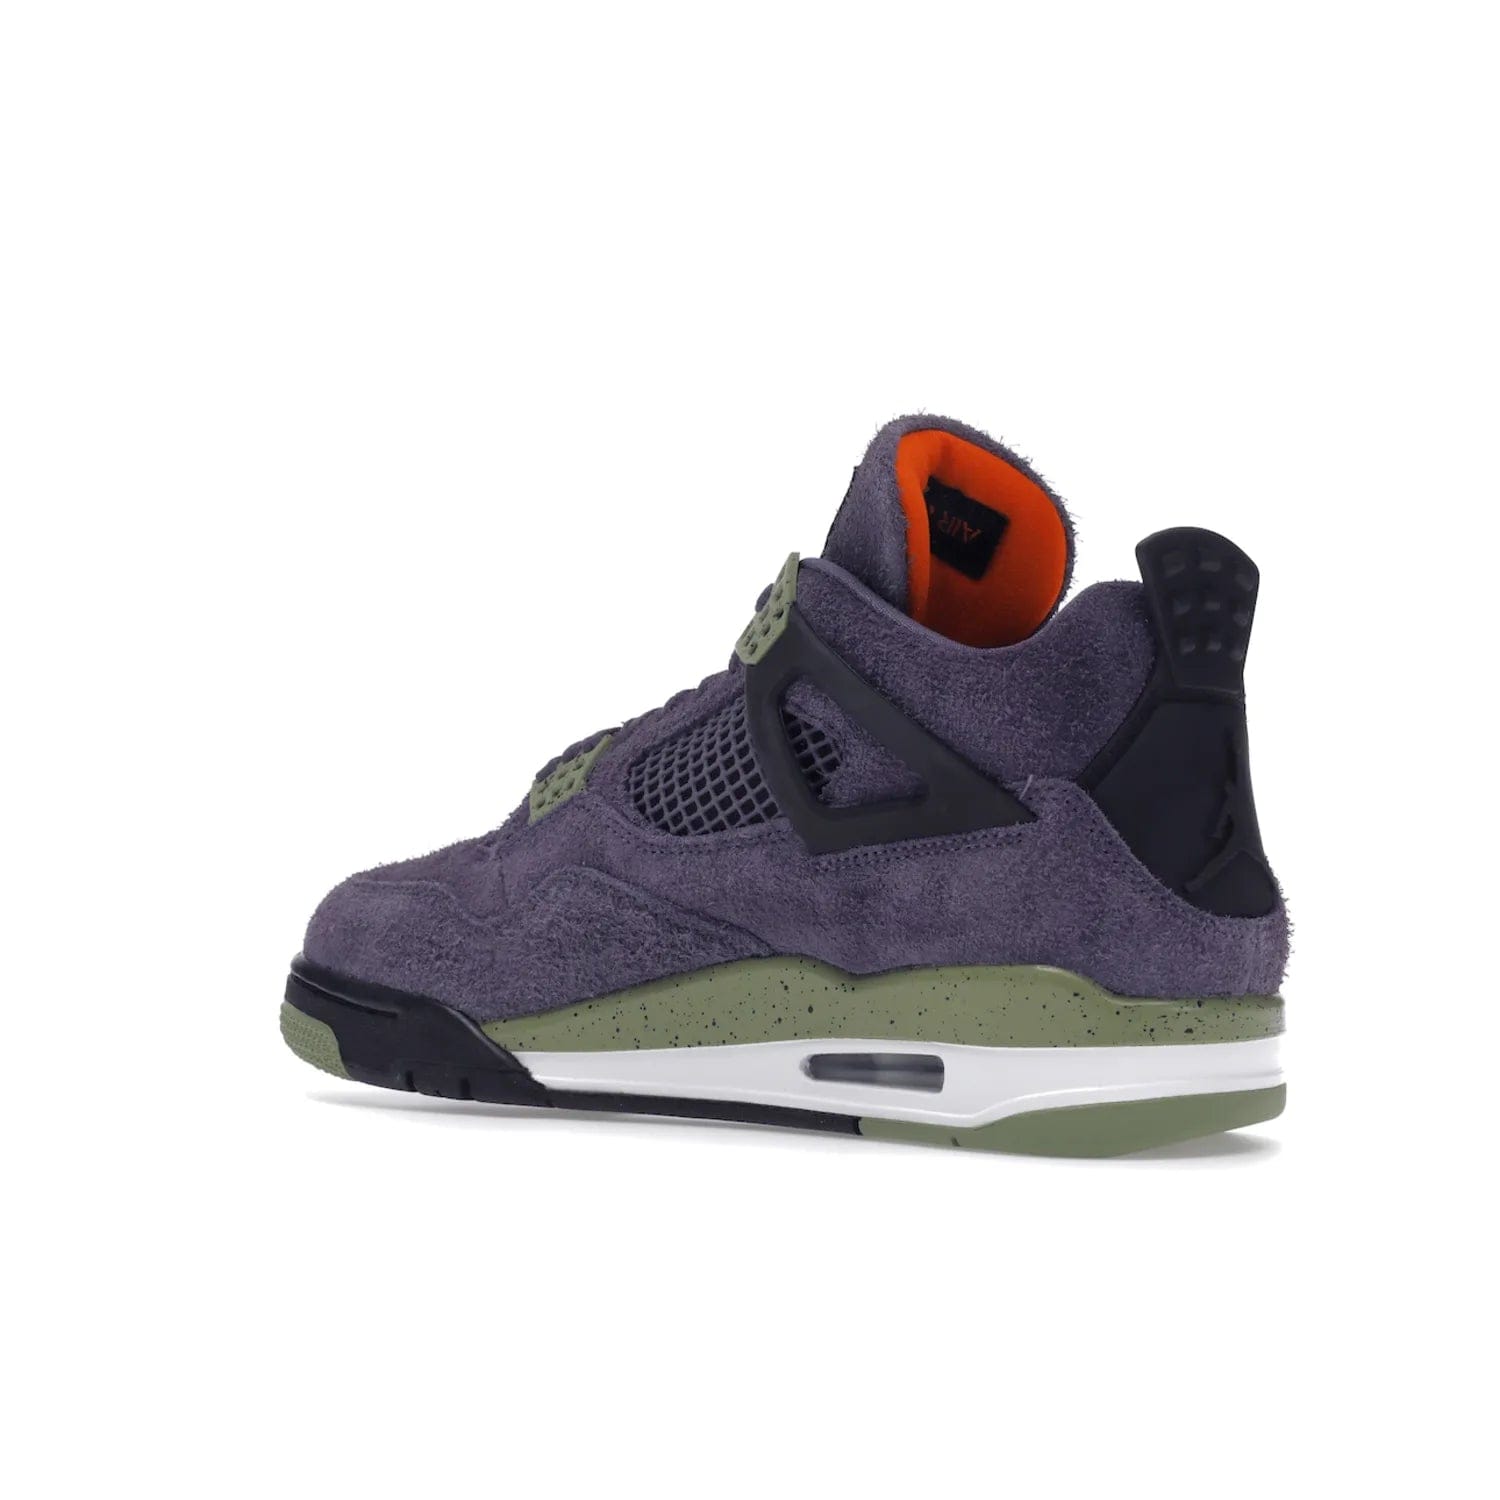 Jordan 4 Retro Canyon Purple (Women's) - Image 23 - Only at www.BallersClubKickz.com - New Air Jordan 4 Retro Canyon Purple W sneaker features shaggy purple suede, lime highlights & safety orange Jumpman branding. Classic ankle-hugging silhouette with modern colors released 15/10/2022.